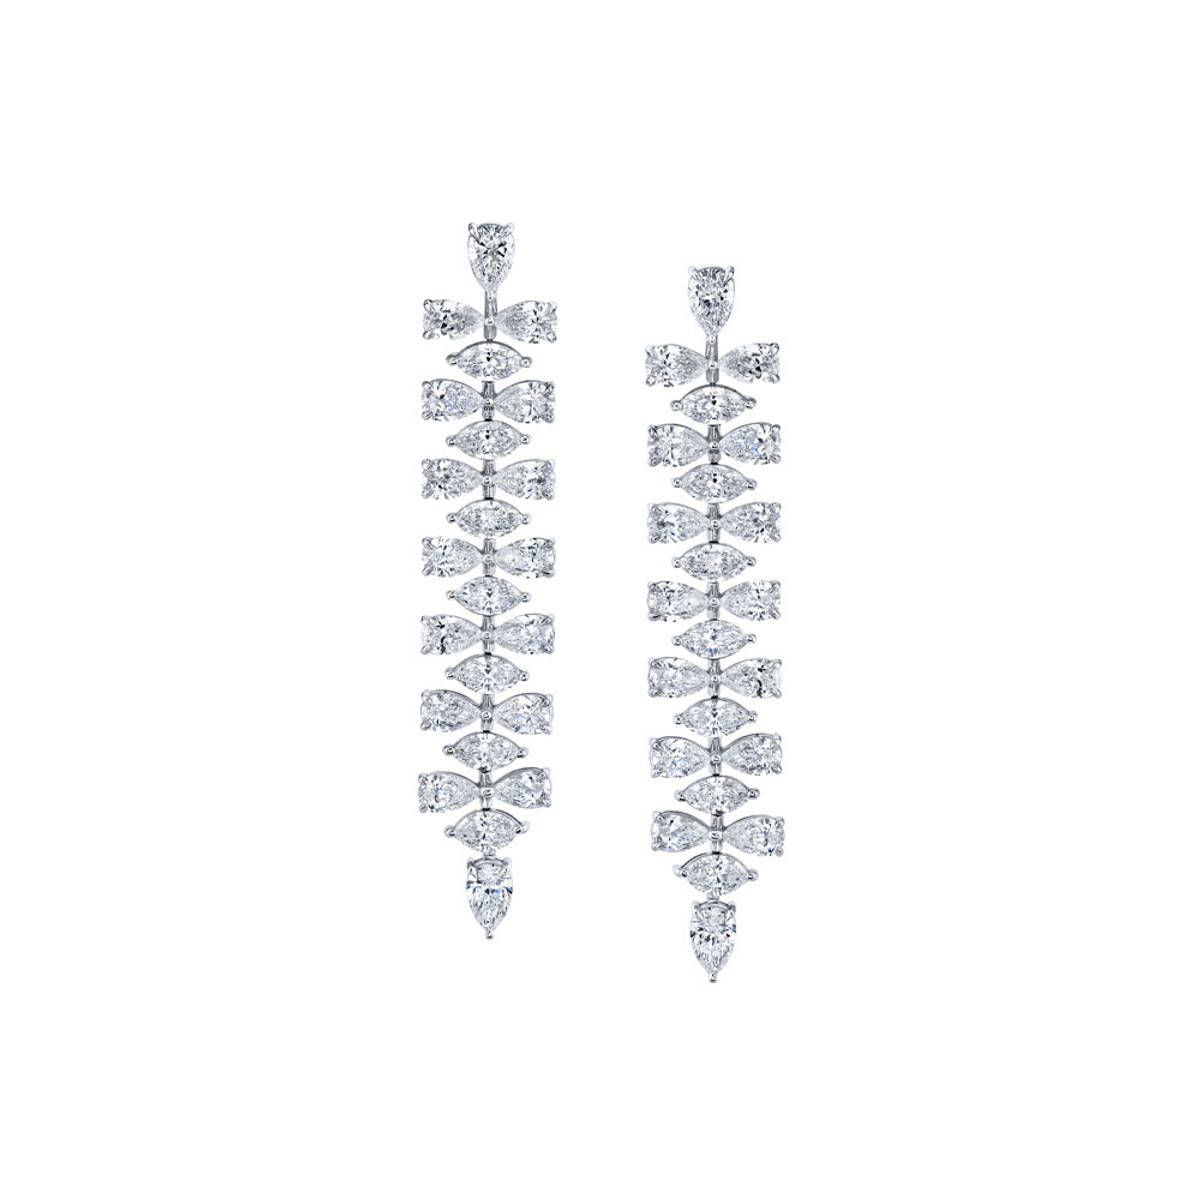 Hyde Park Collection 18K White Gold Diamond Drop Earrings-58175 Product Image